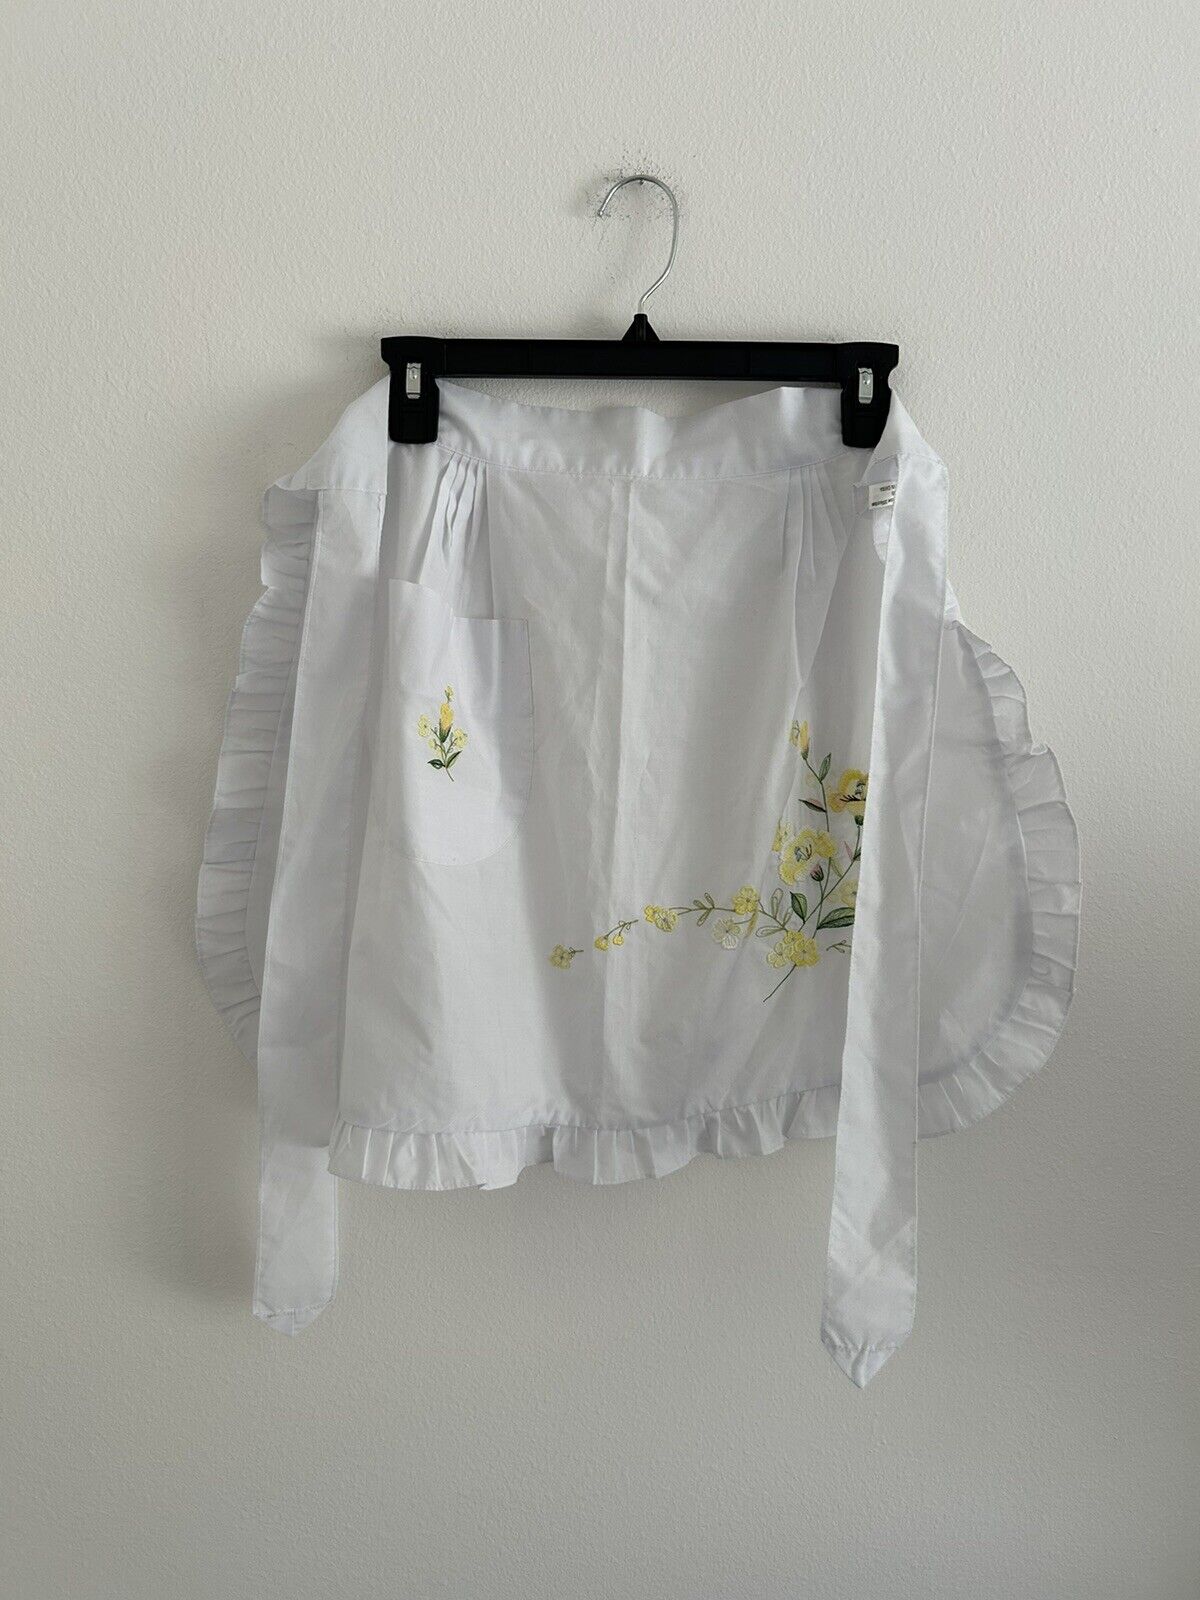 Vintage Look Embroidered Half Apron White with Yellow Flowers & Small Pocket